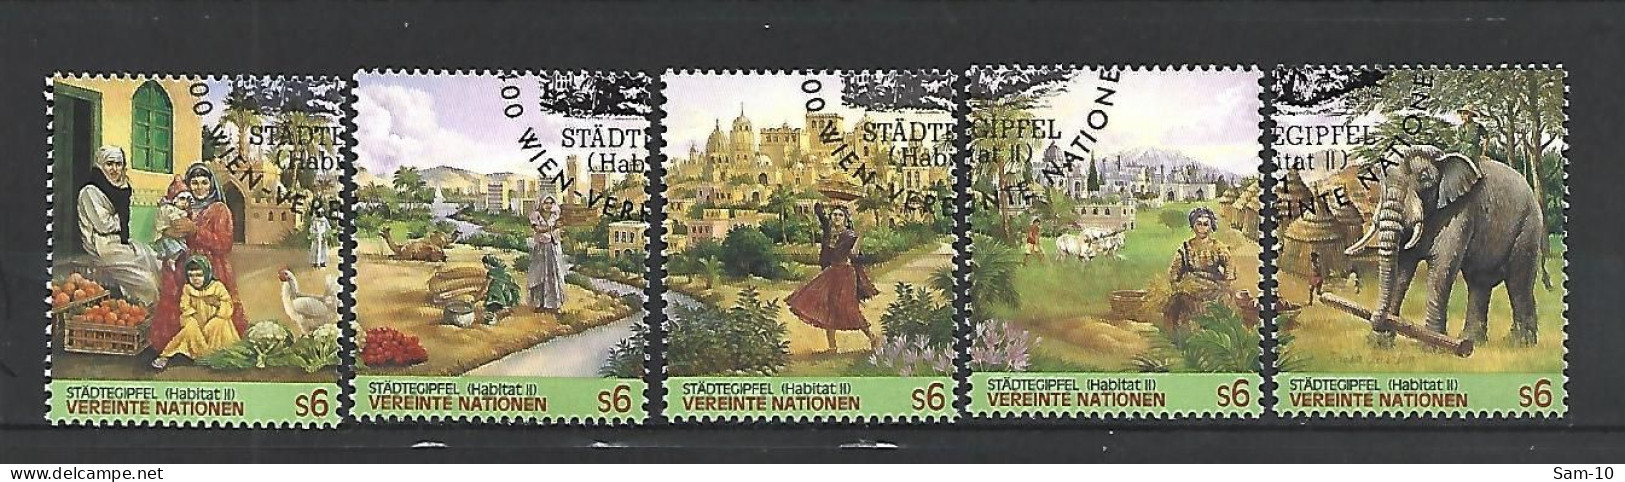 Timbres Nations-Unies Vienne Oblitéré N 229 / 233 - Used Stamps